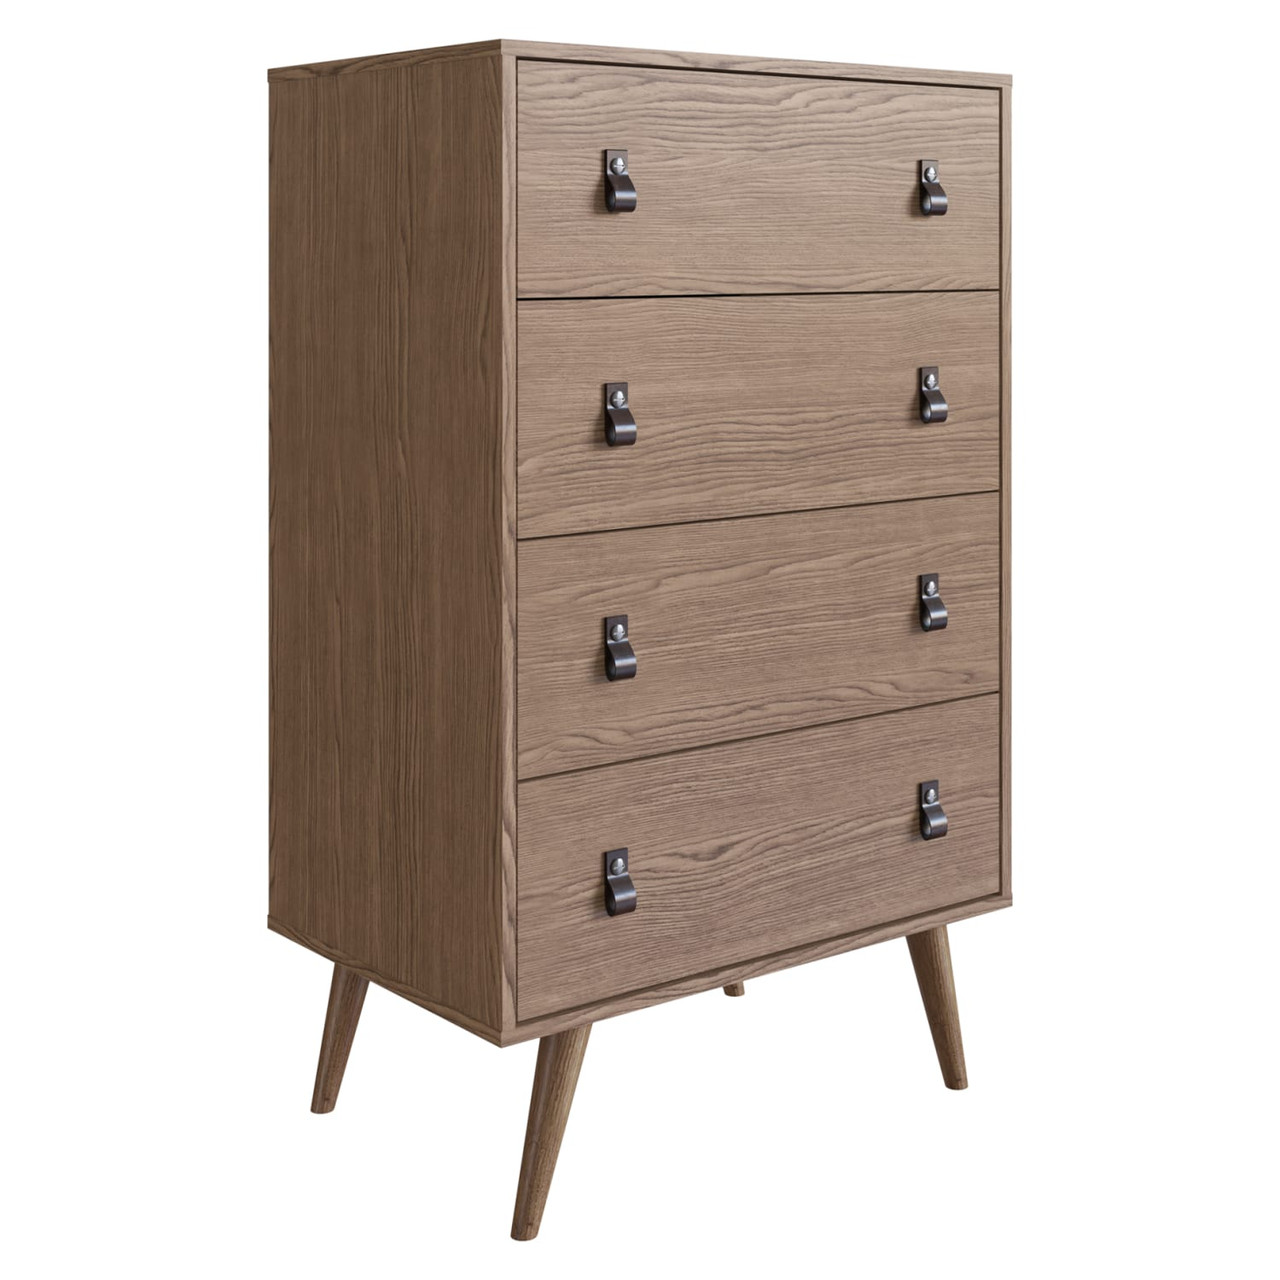 Amber Tall Dresser with Faux Leather Handles in Nature